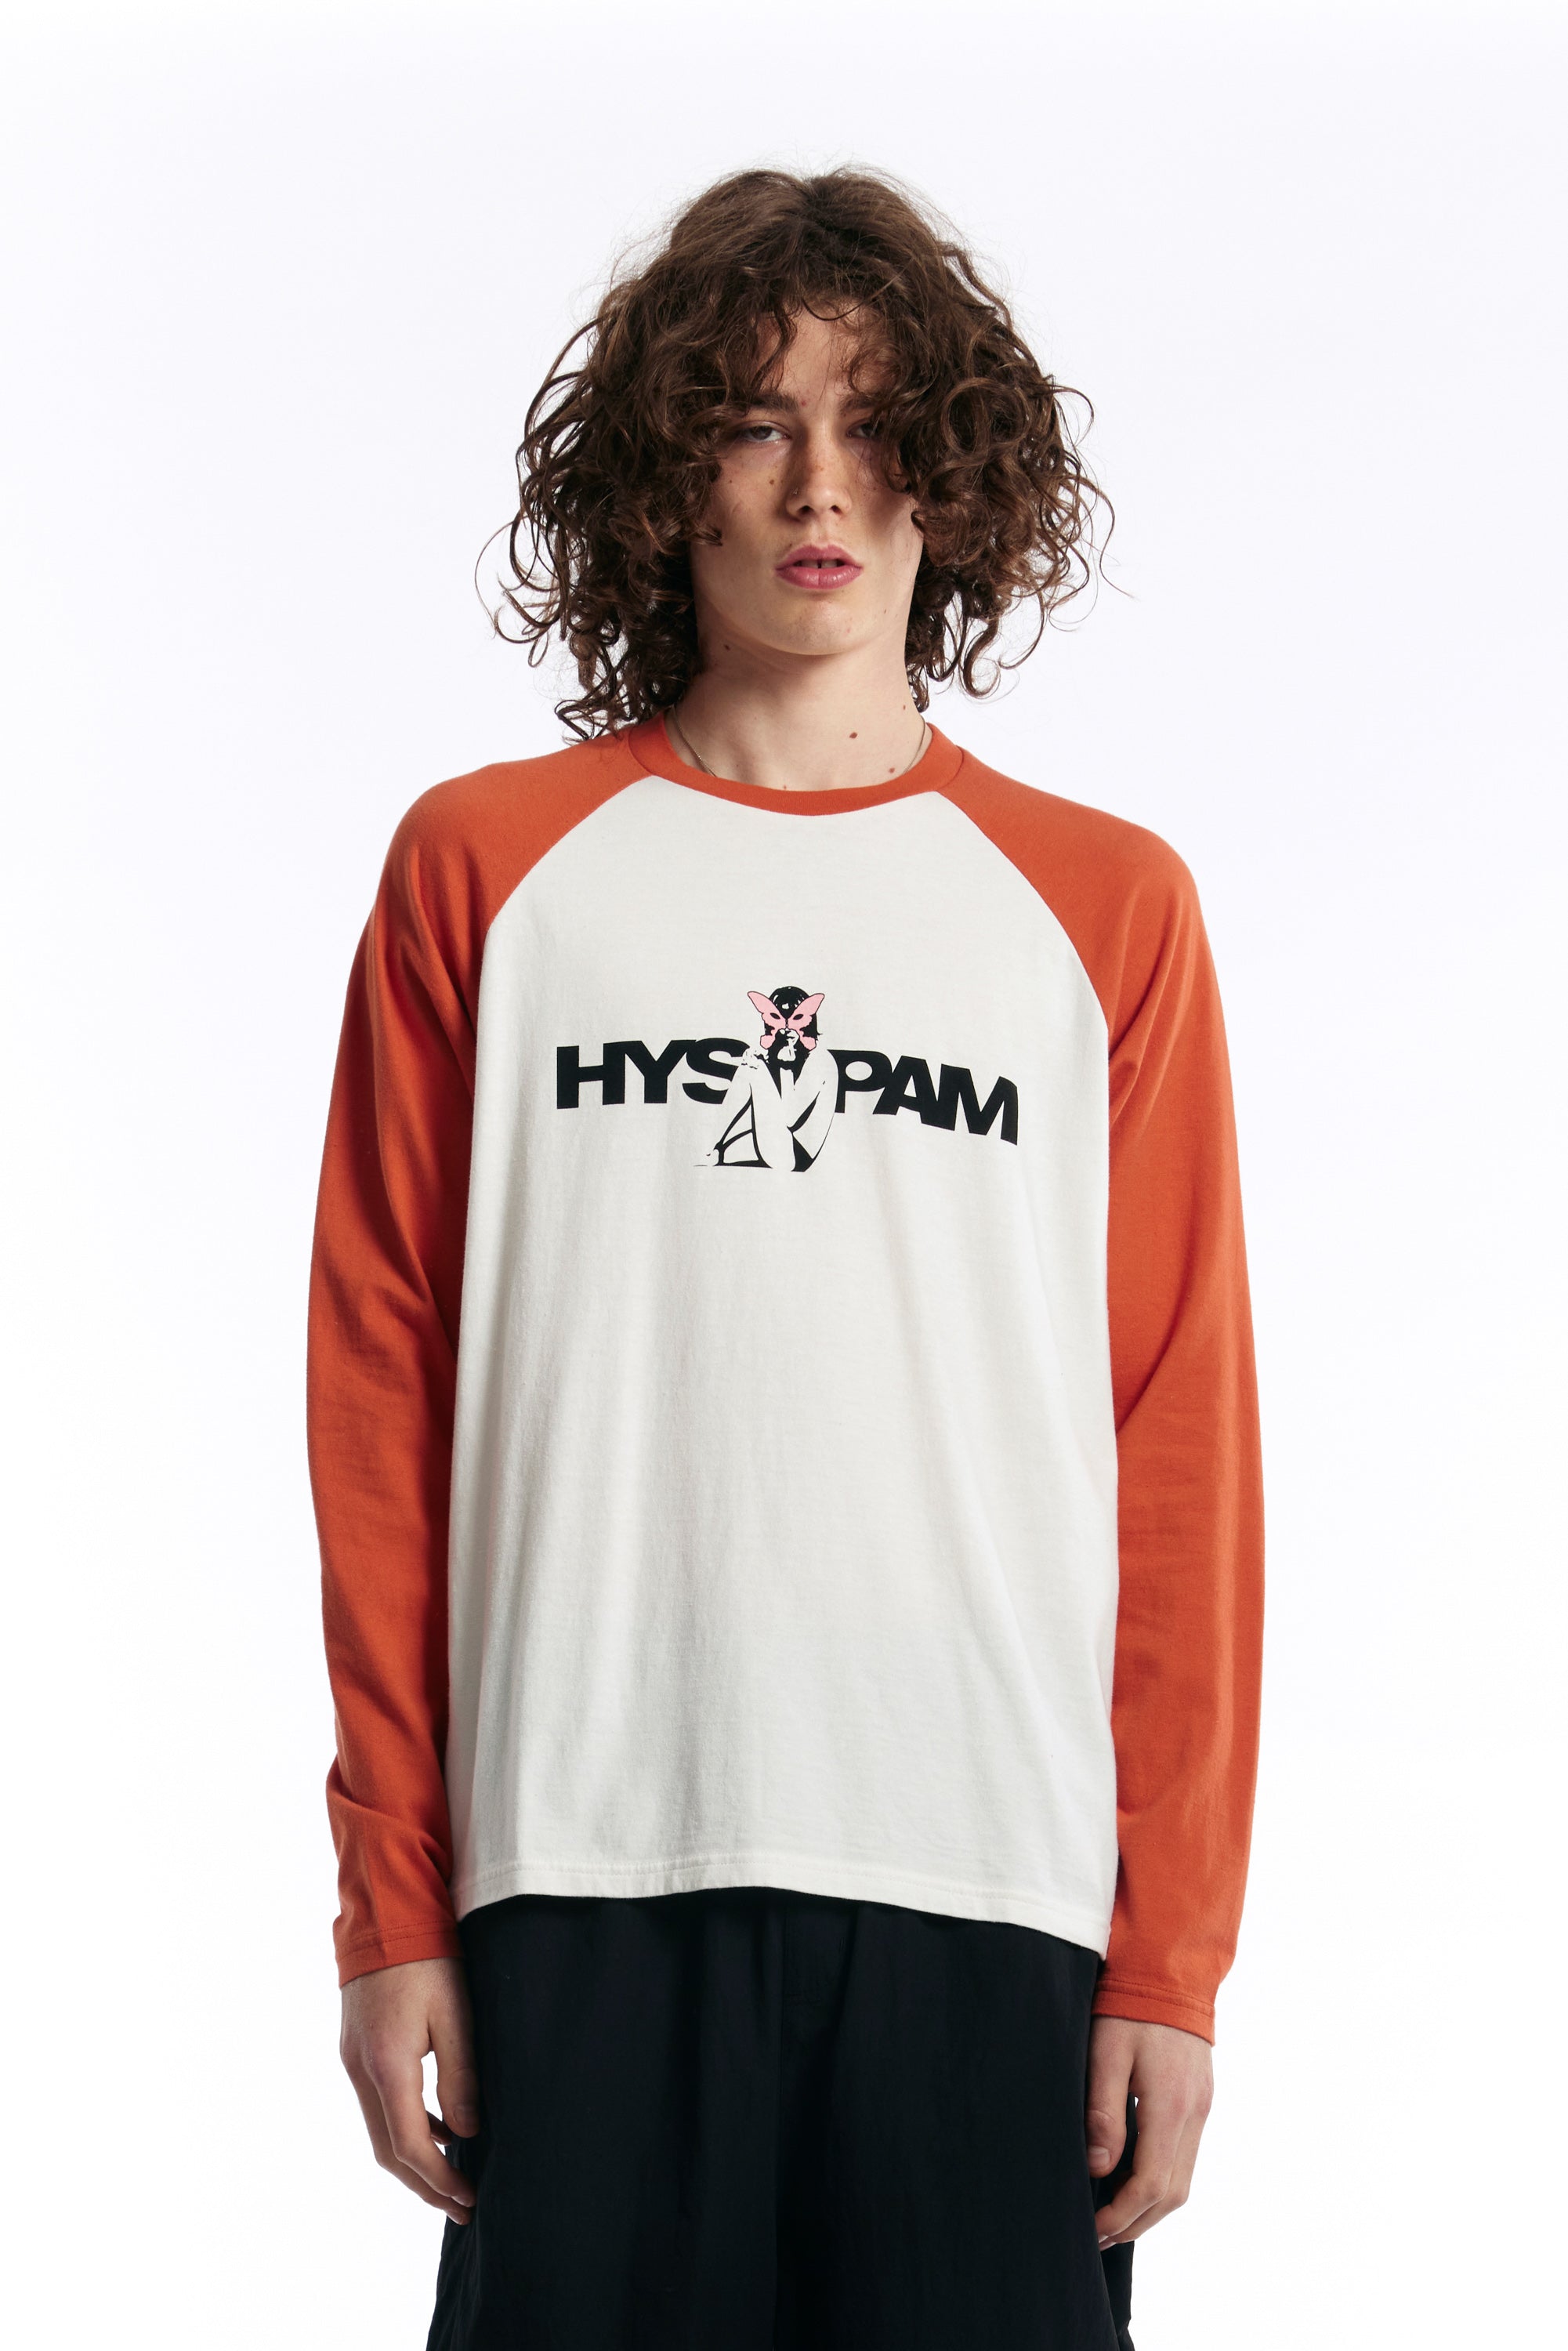 The PAM X HYSTERIC GLAMOUR - ALIEN GIRL LS T SHIRT WHITE/ORANGE available online with global shipping, and in PAM Stores Melbourne and Sydney.